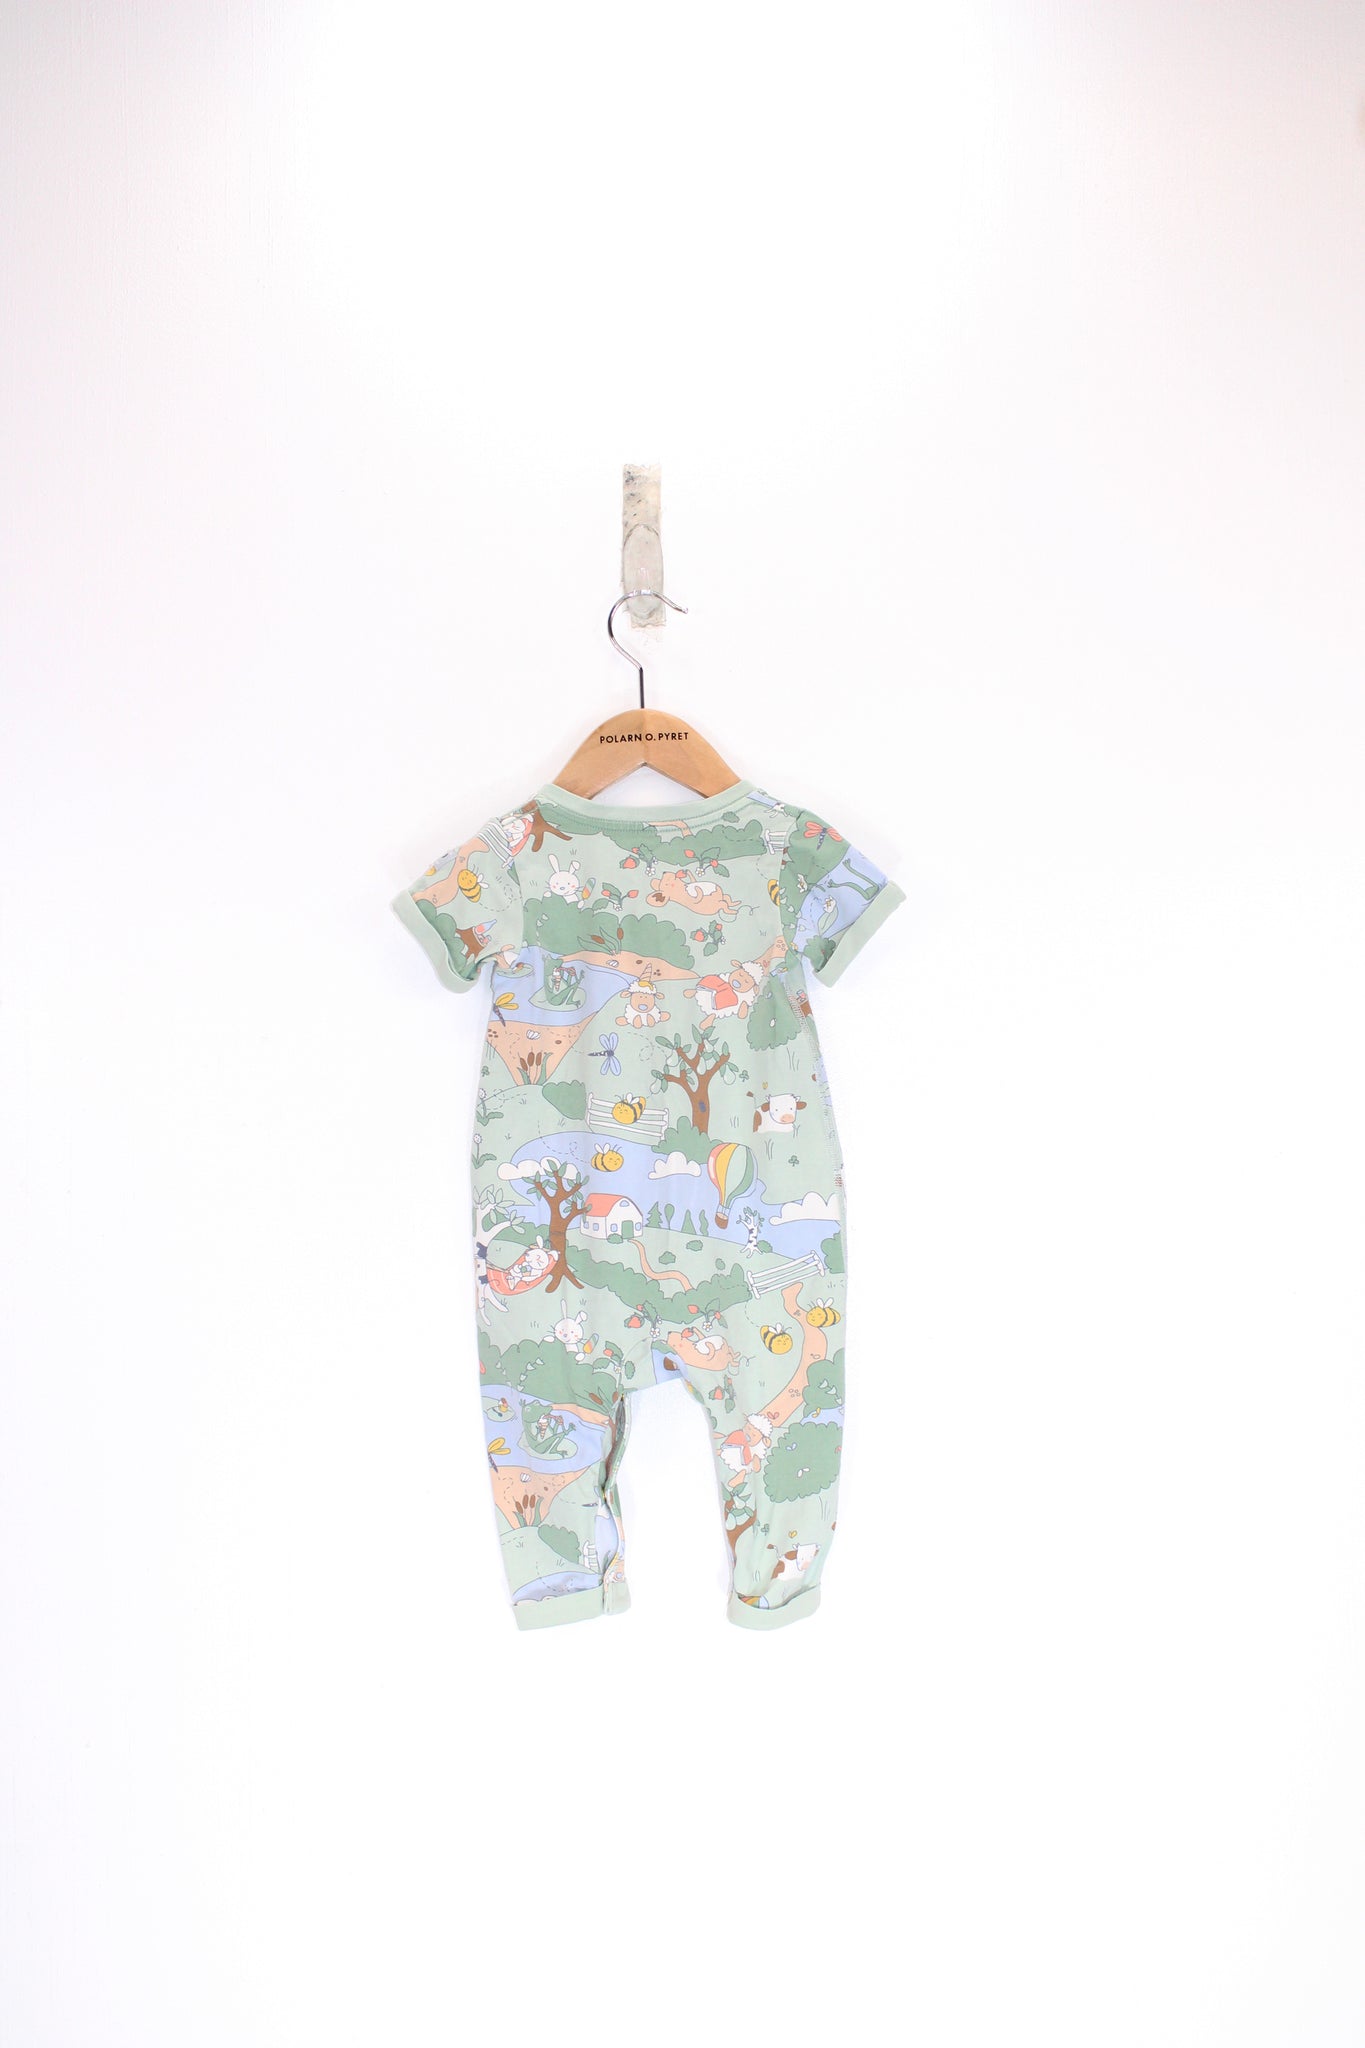 Baby All-in-one 2-4m / 62